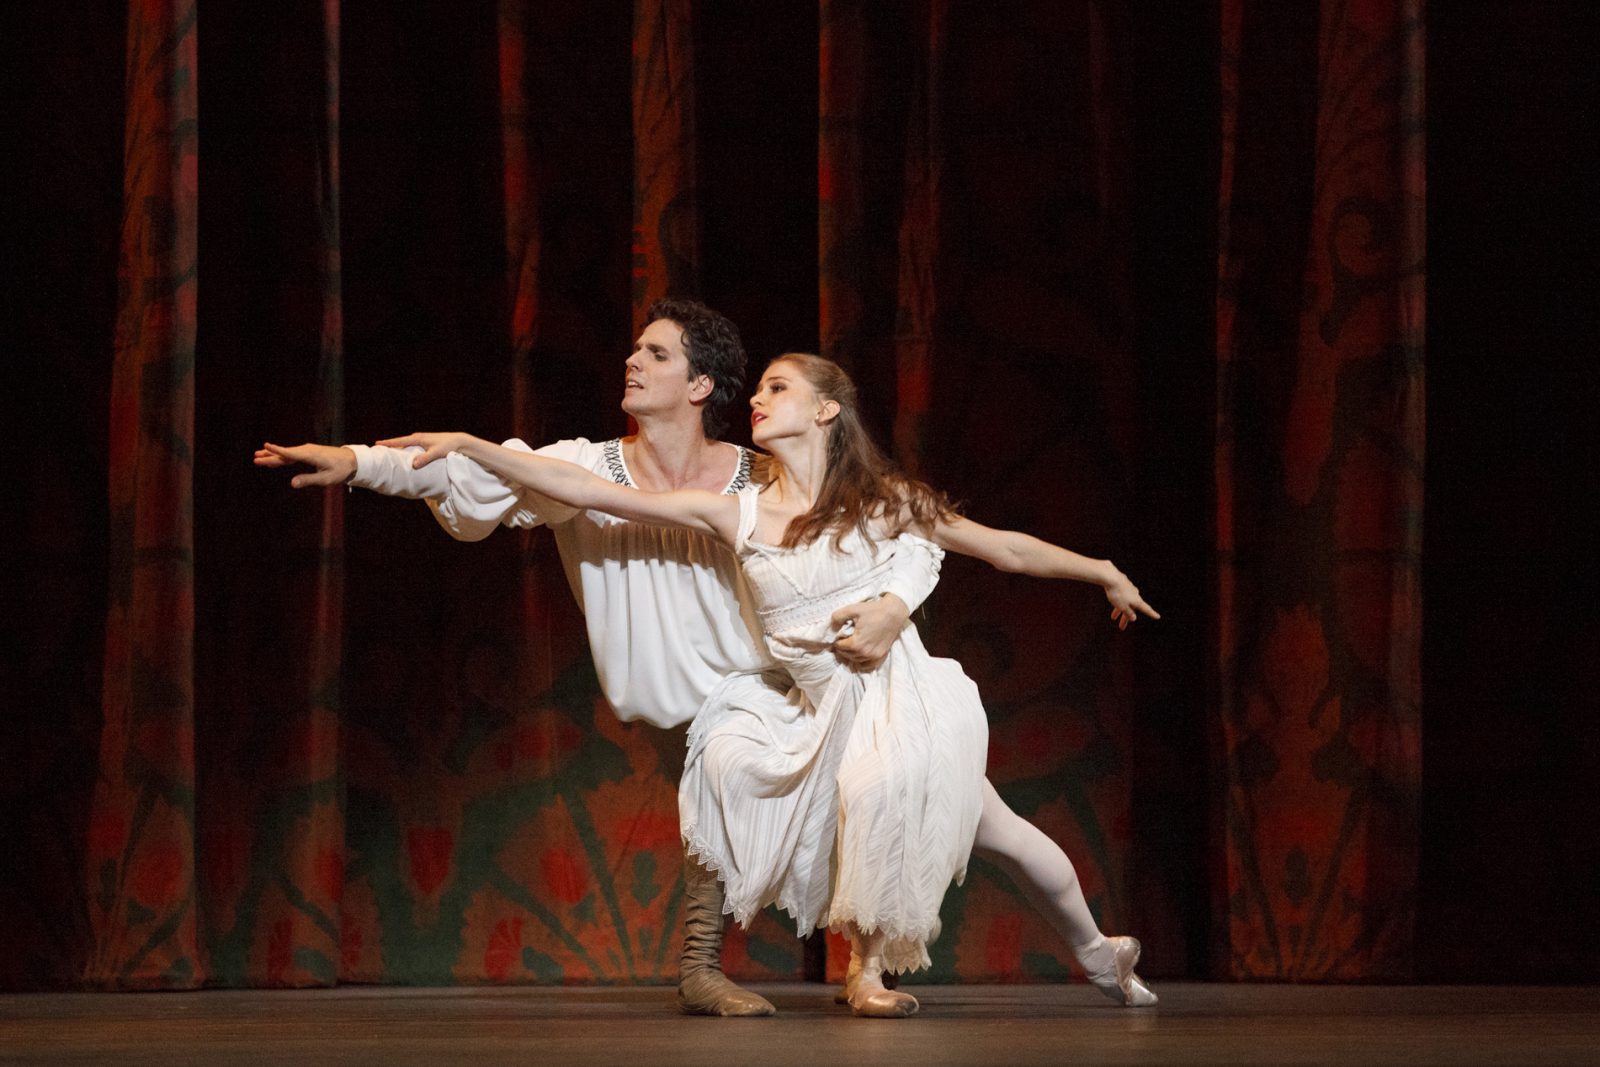 Guillaume Côté and Elena Lobsanova in Romeo and Juliet